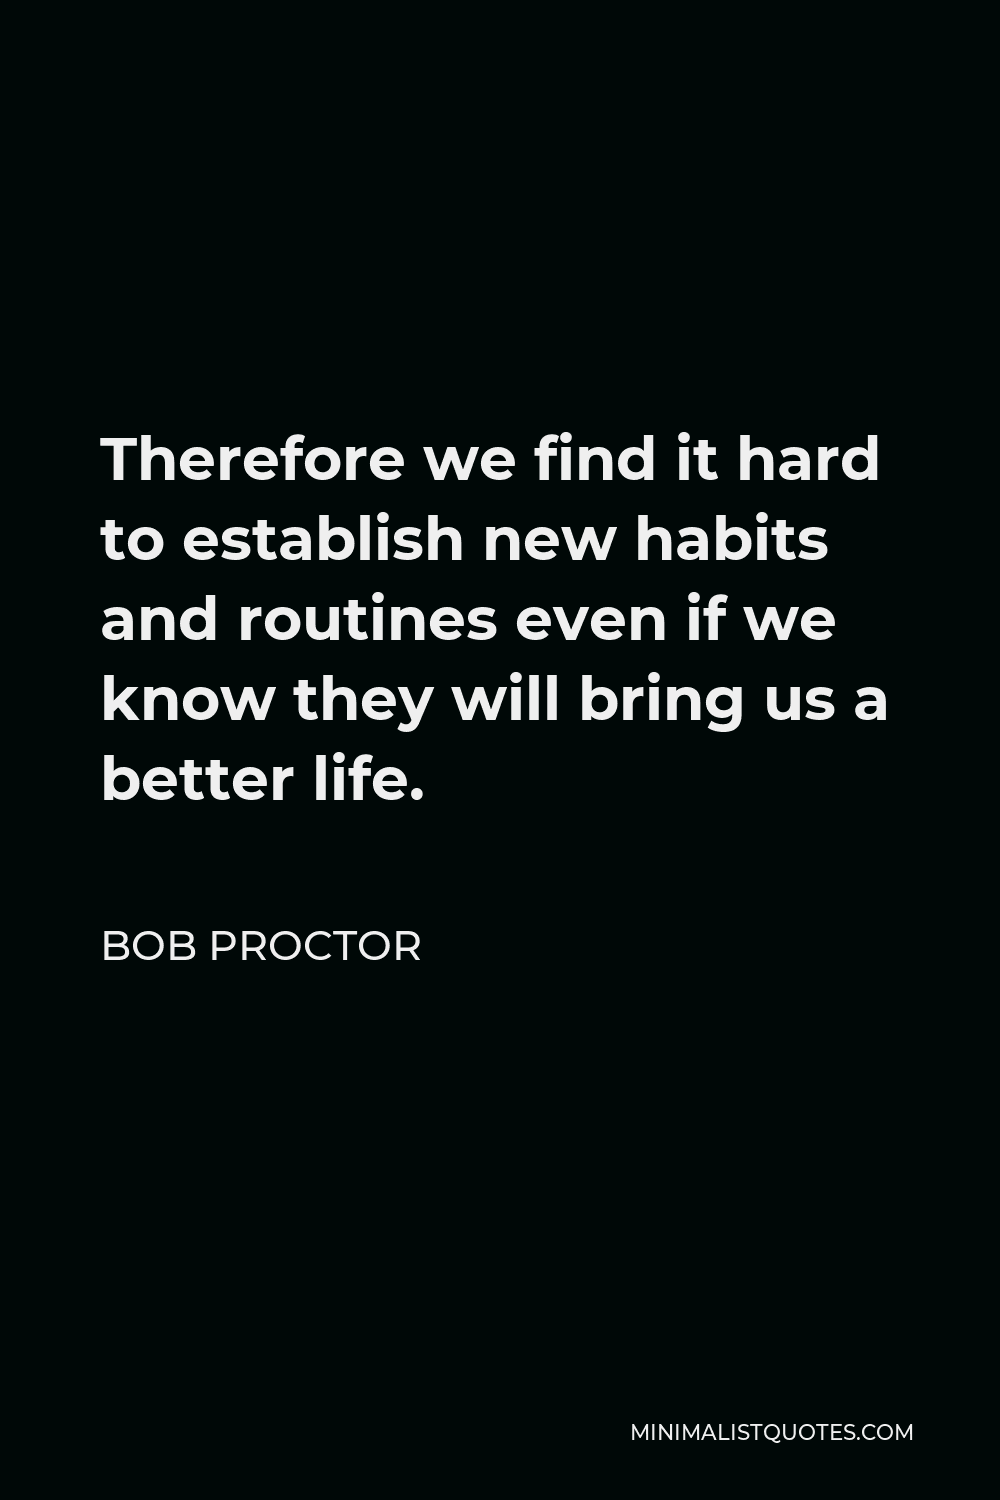 Bob Proctor Quote - Therefore we find it hard to establish new habits and routines even if we know they will bring us a better life.